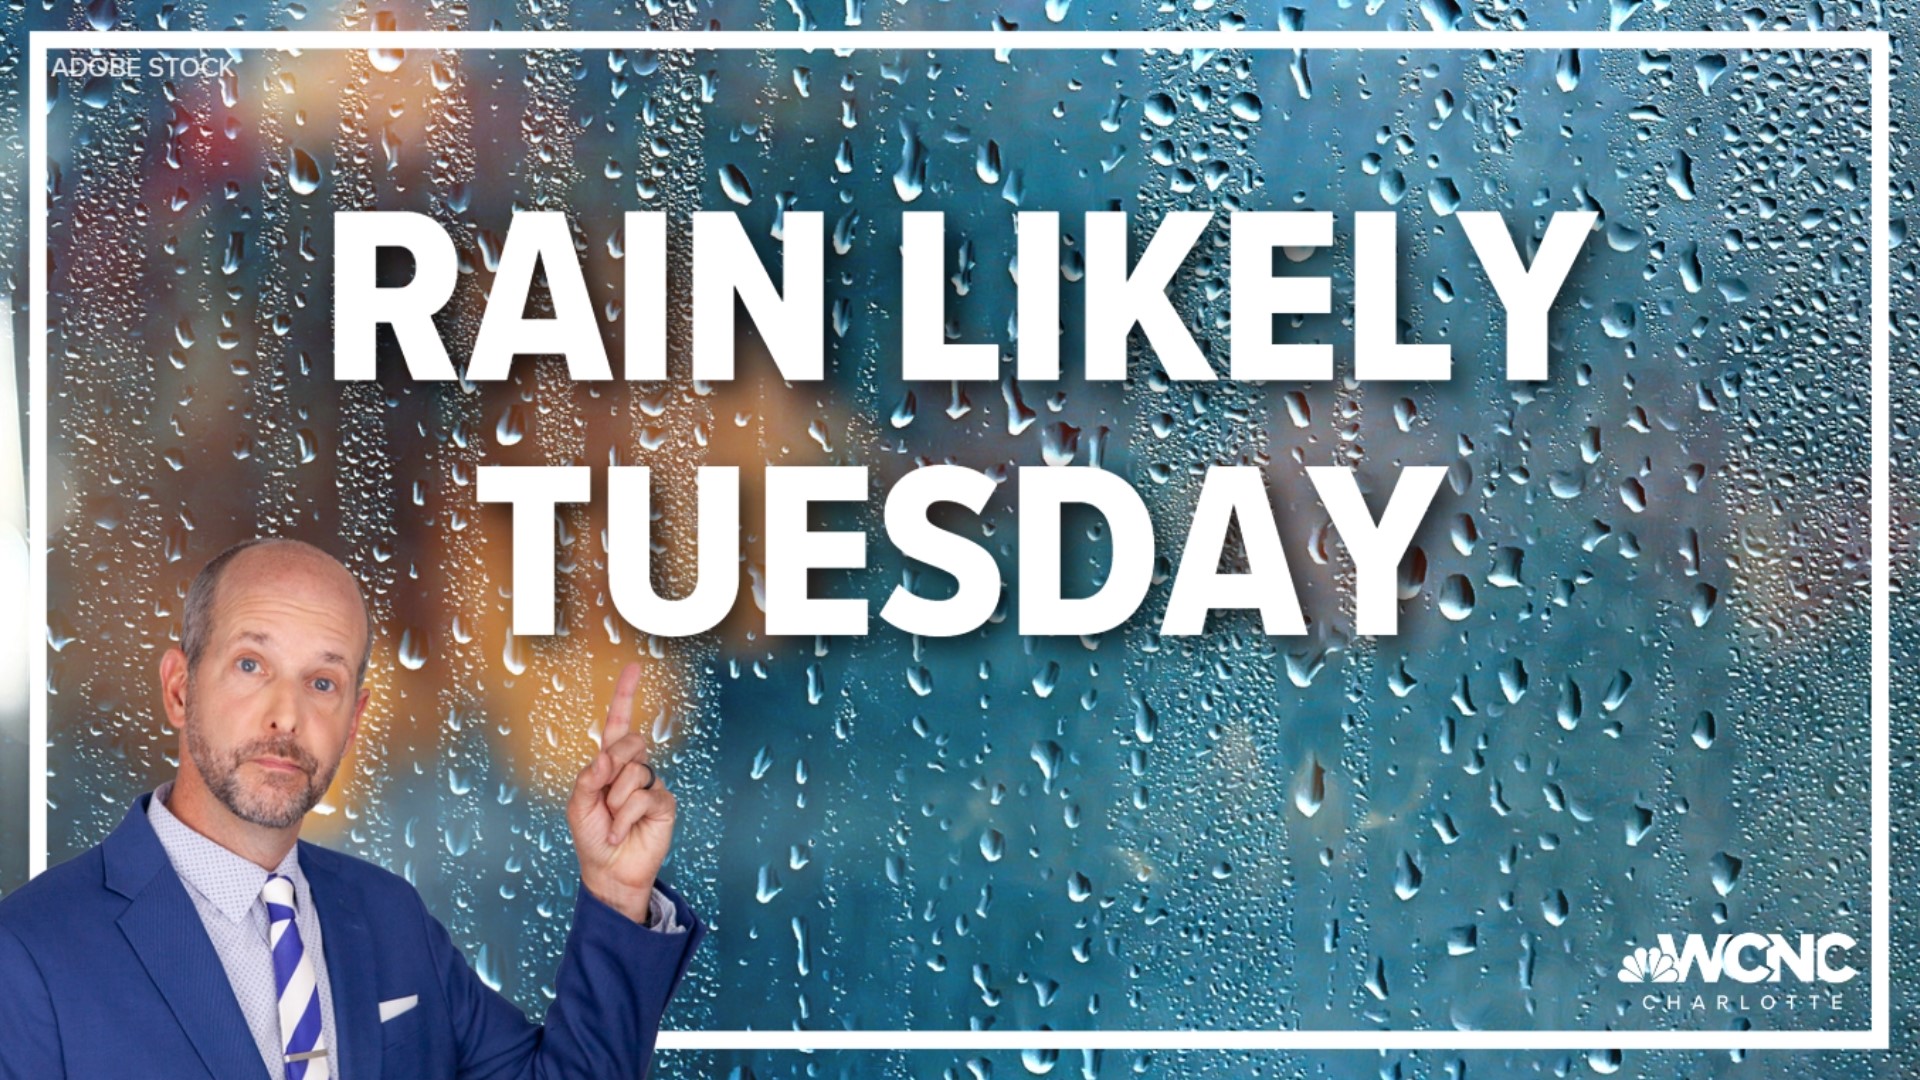 There's a slight chance of showers Tuesday night, with near-steady temperatures in the low to mid-50s.